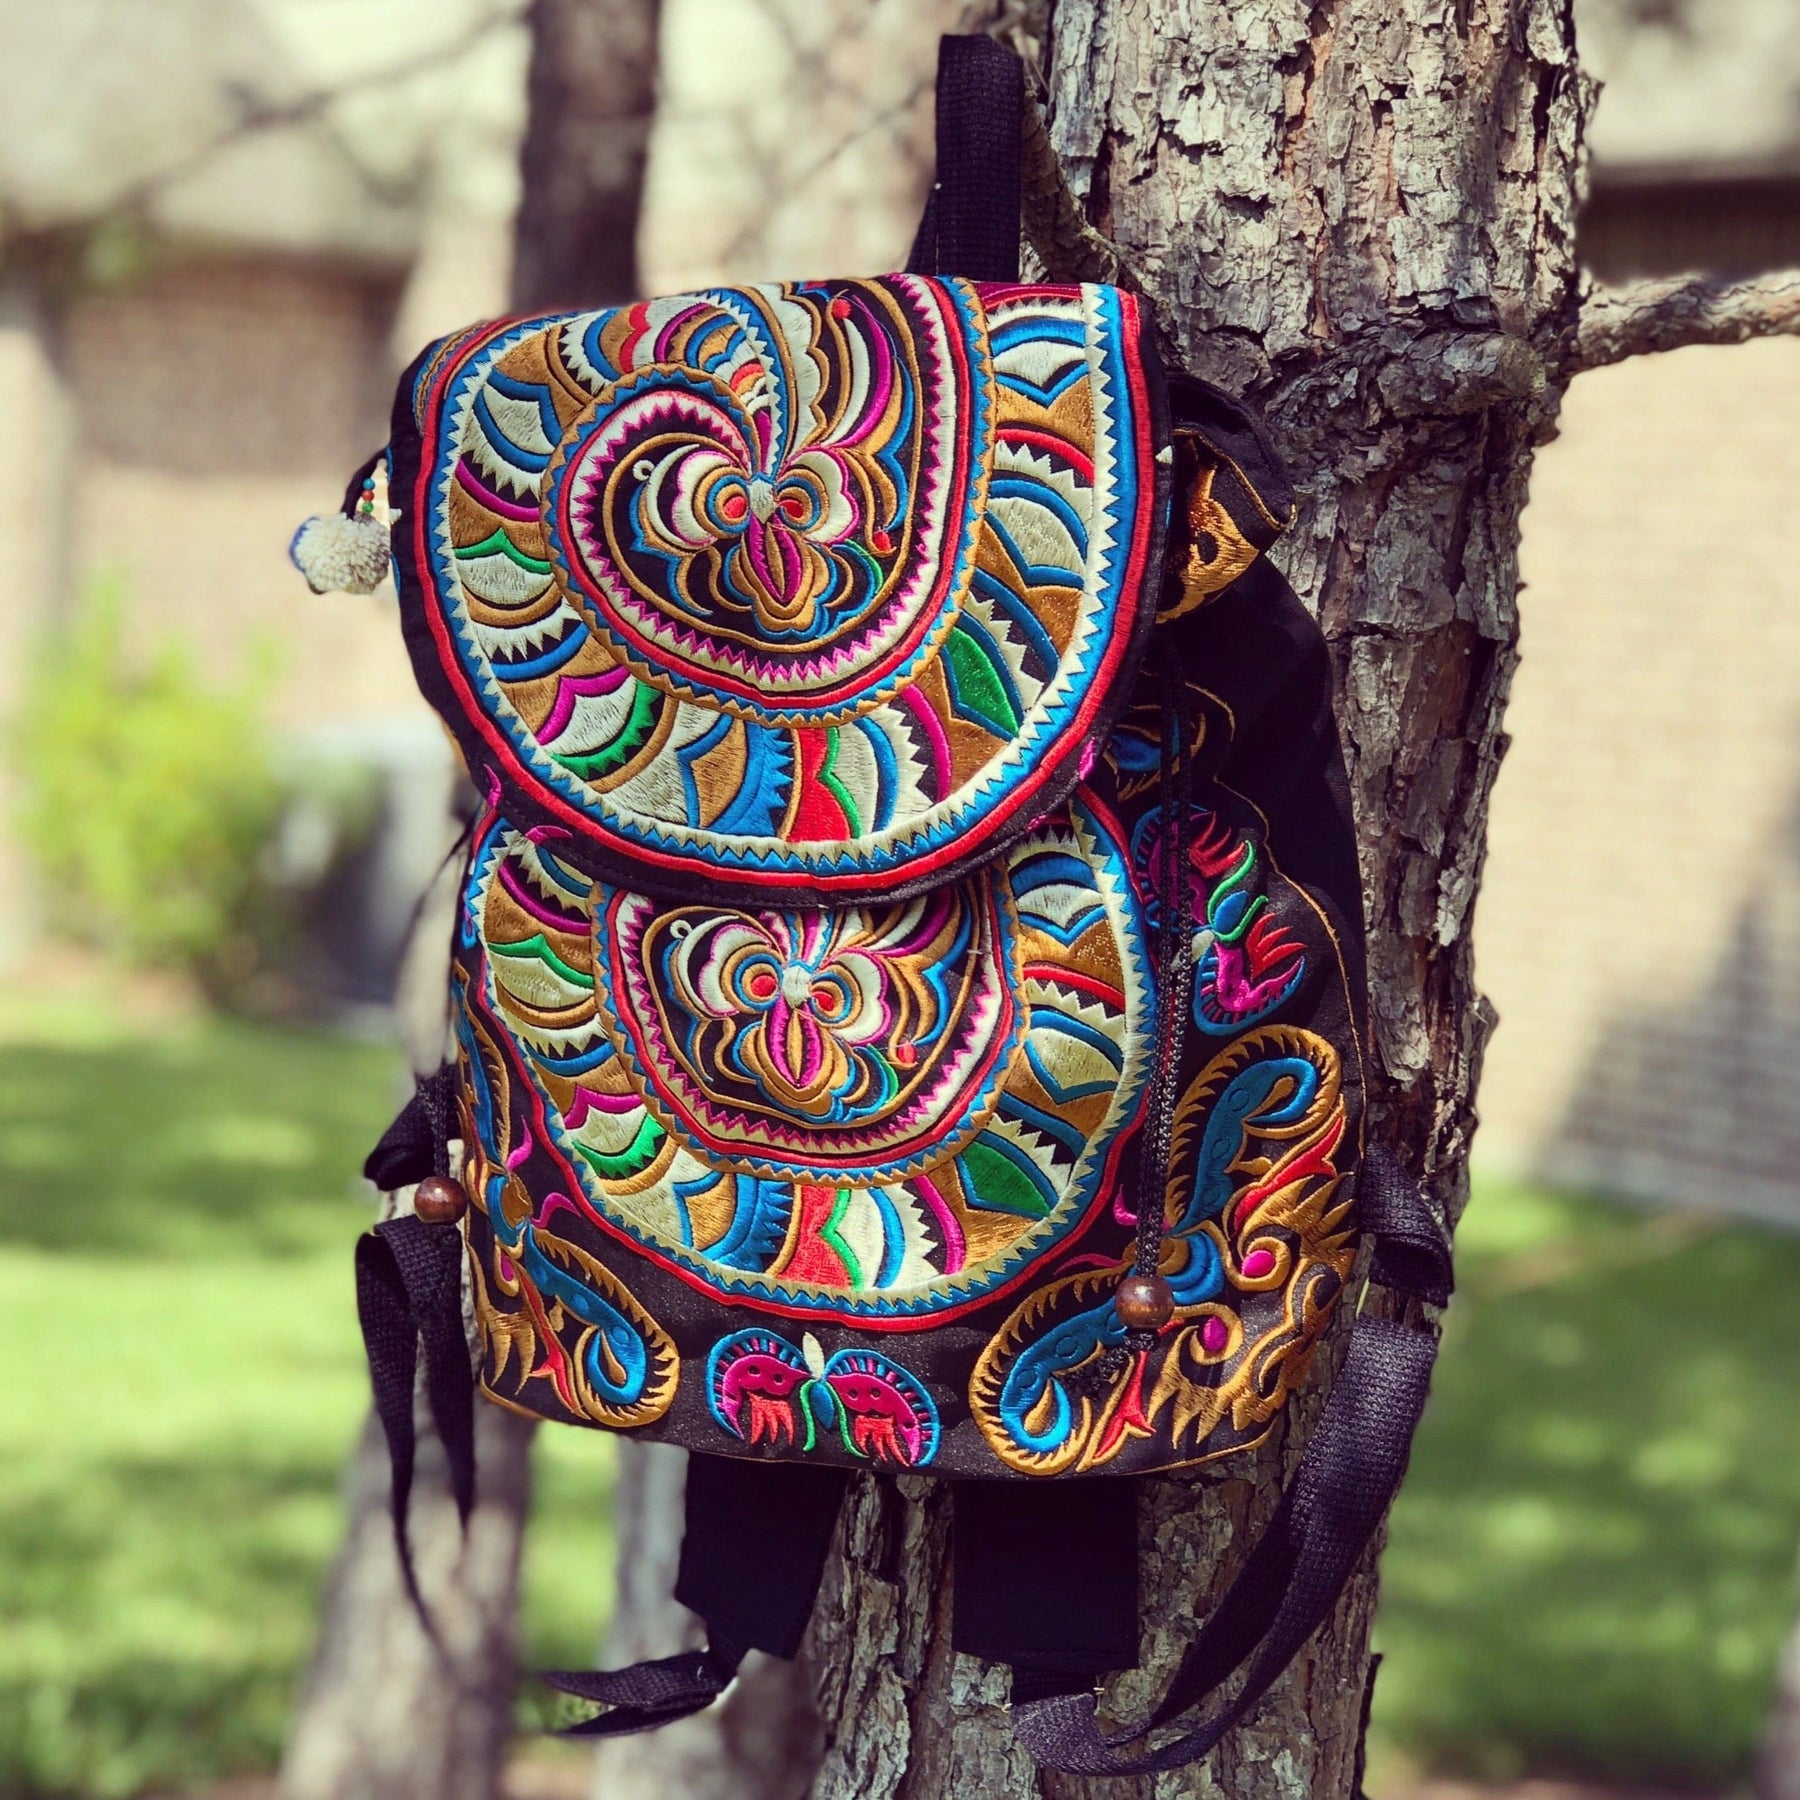 Bohemian Extra Large Canvas Backpack